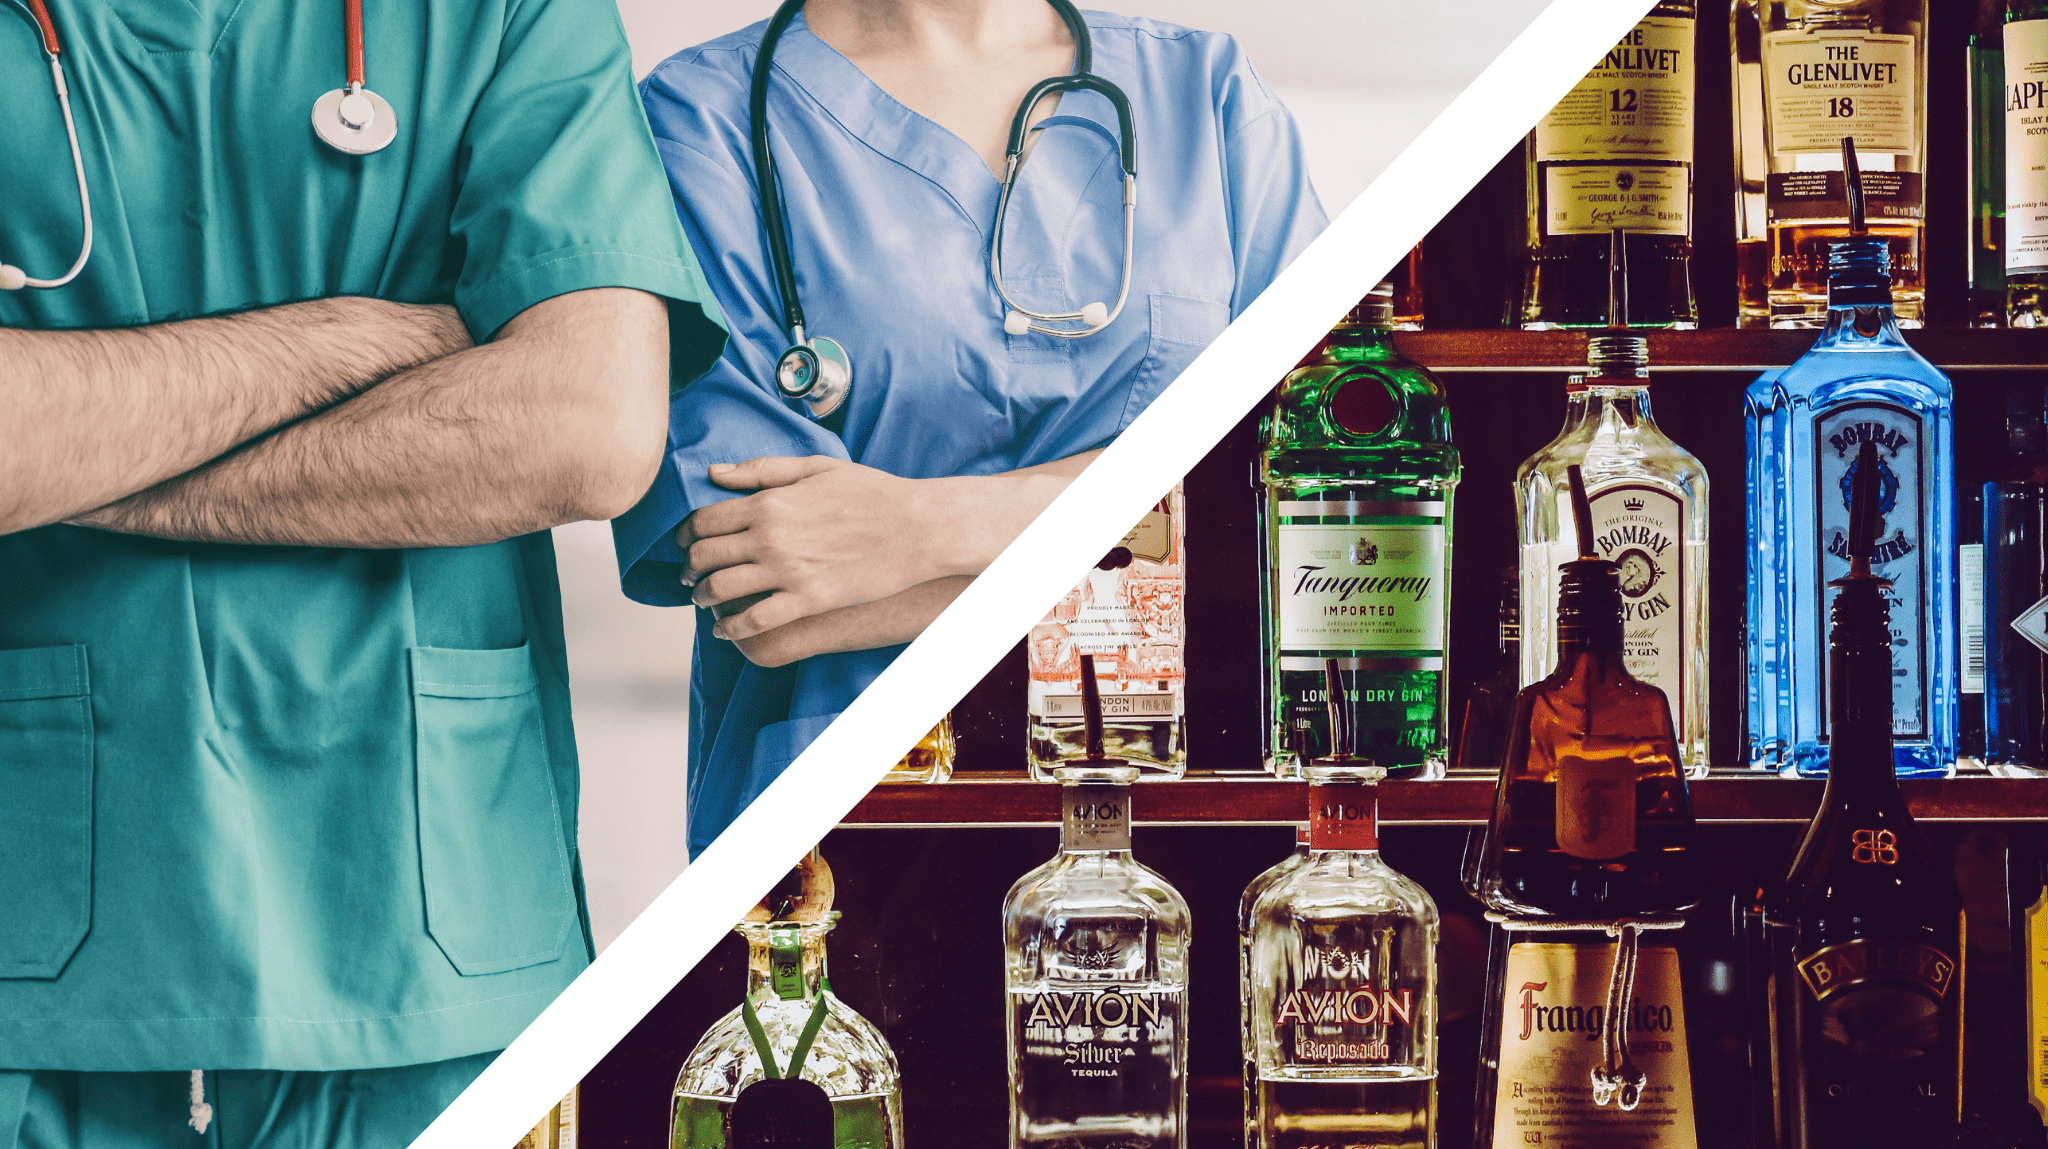 To-go alcohol, certified nursing assistant bills fly through House